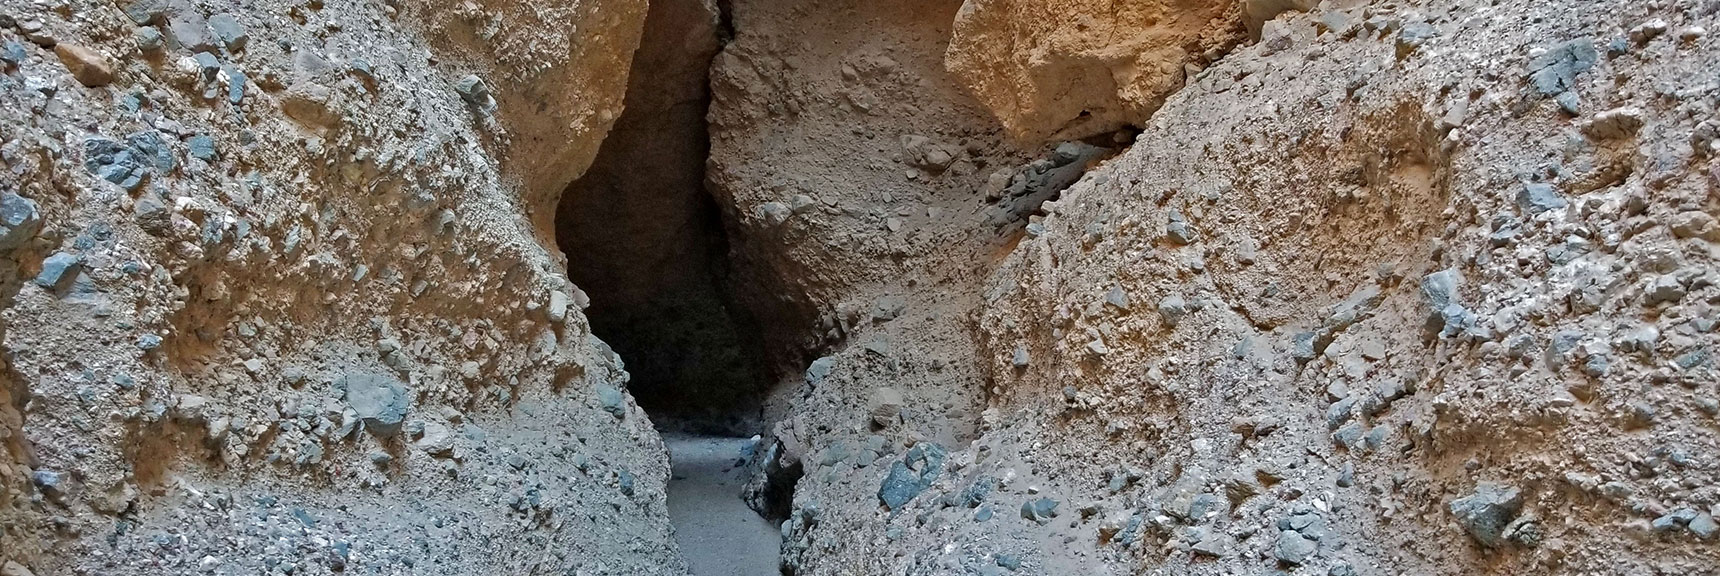 Entering the Dark Chamber in the First Slot | Sidewinder Canyon | Death Valley National Park, California